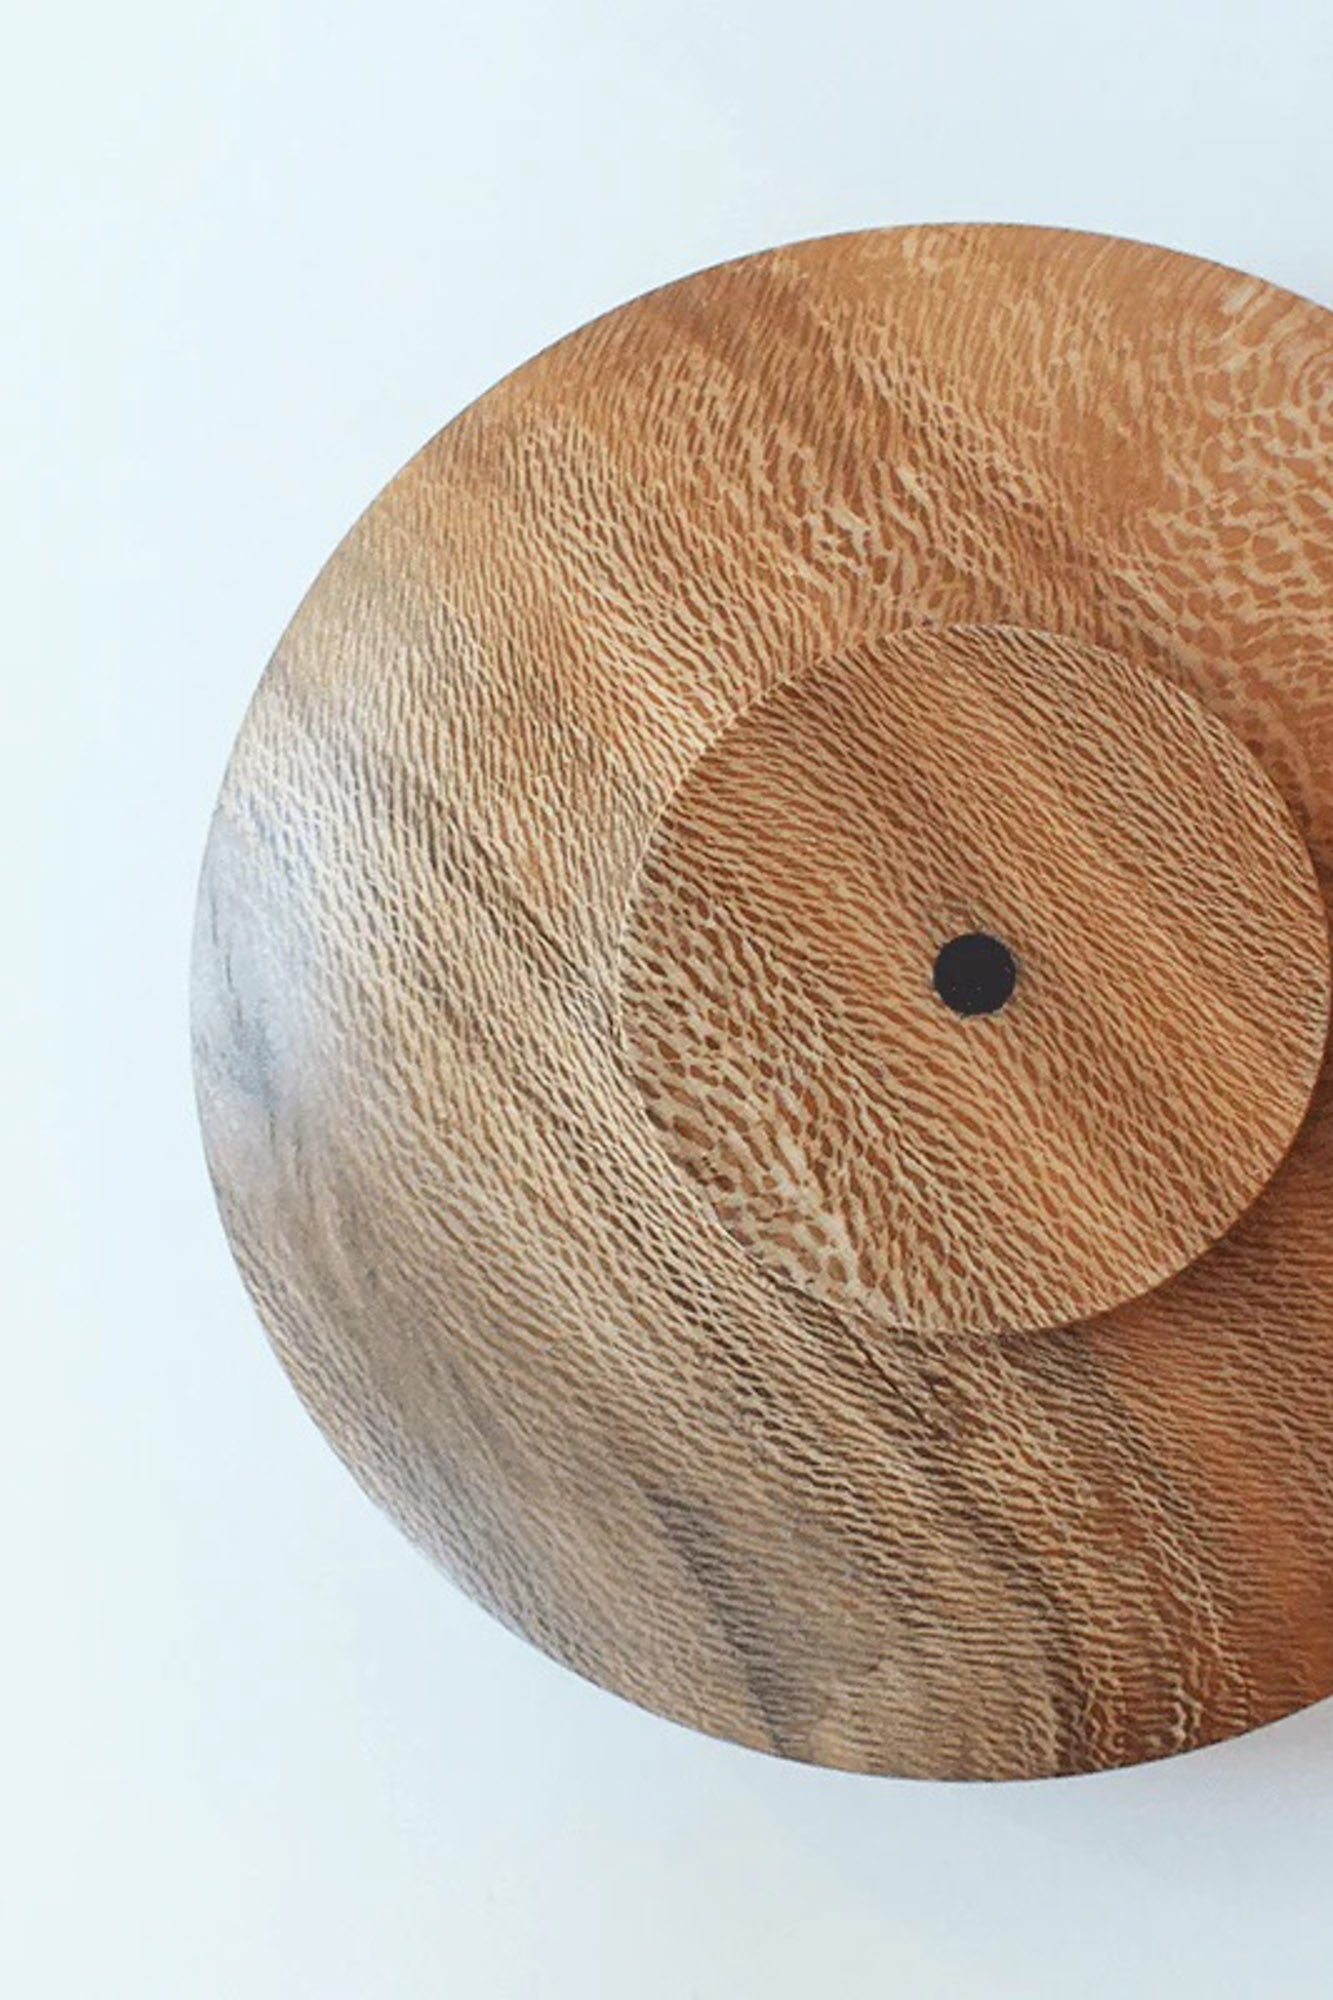 Little Bowl Sycamore Wood displayed from a top-down perspective, revealing its size and shape. The W16 x H5 cm dimensions make it a versatile and compact piece for serving and presenting food.